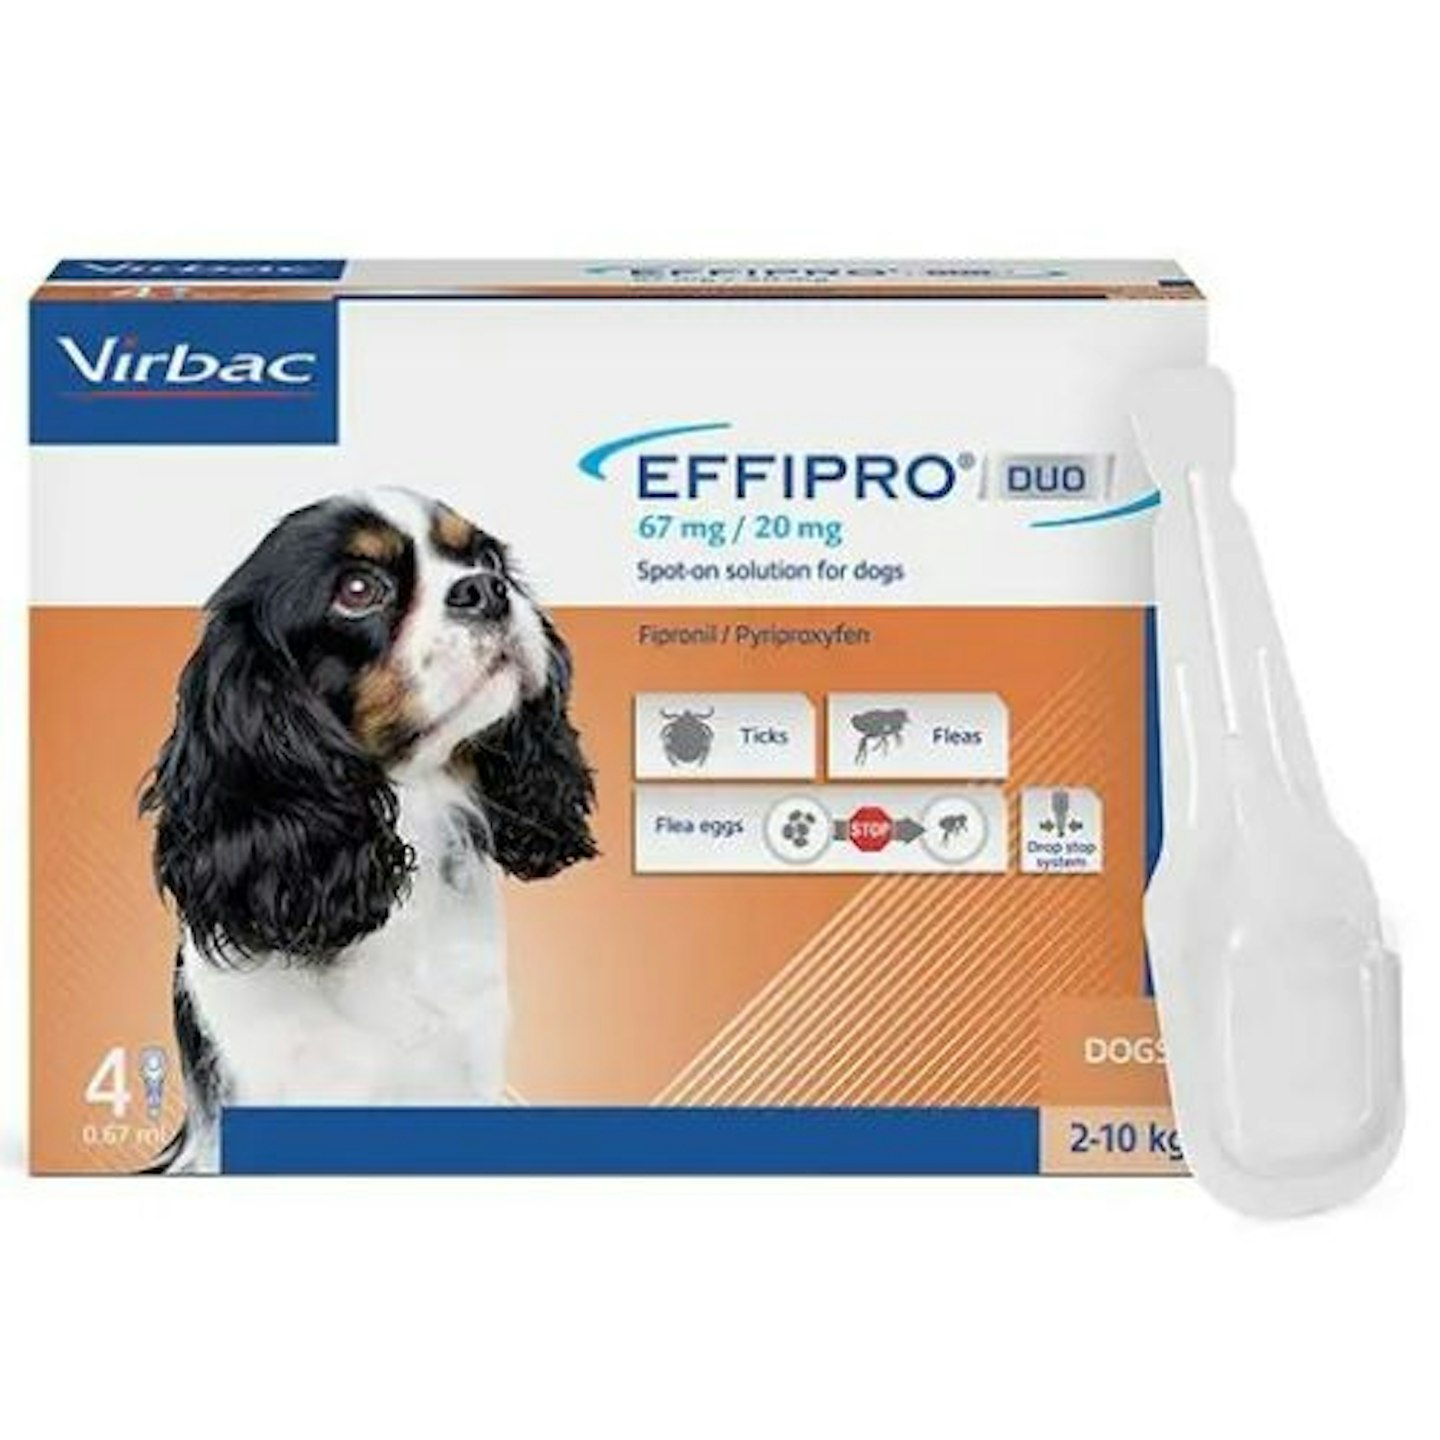 Effipro Duo Spot-on Flea and Tick Treatment